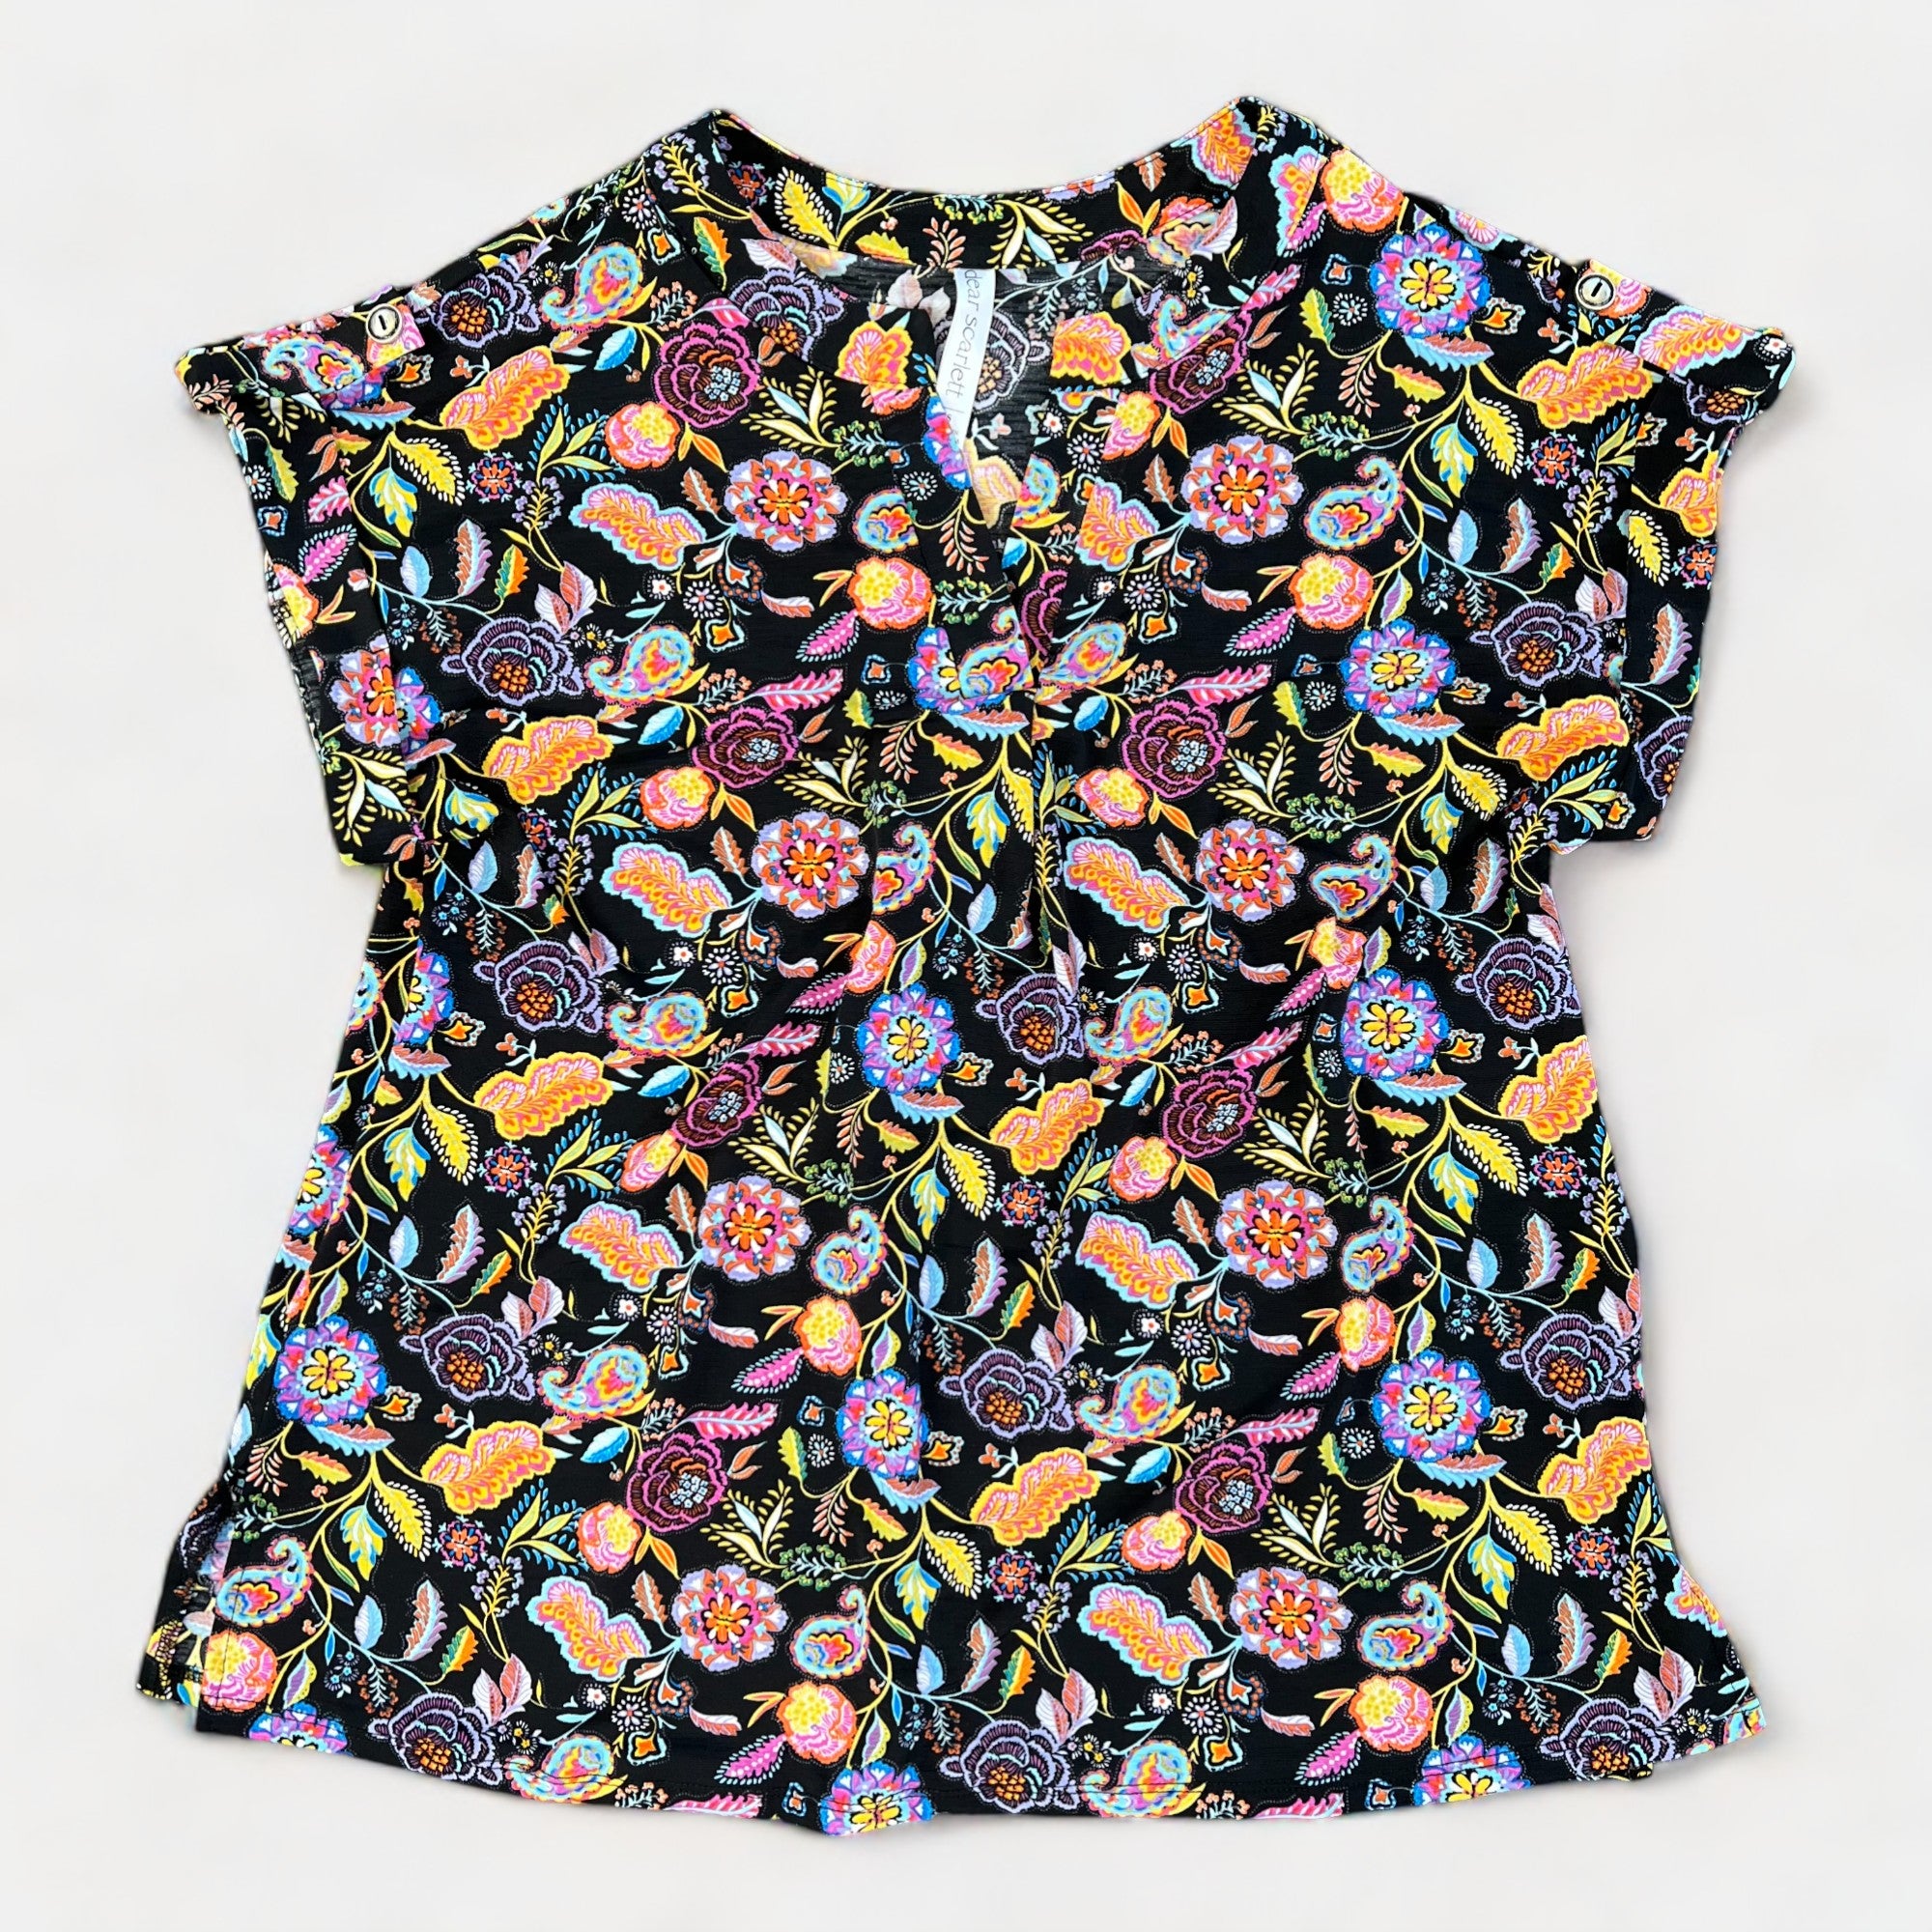 Black Floral Lizzy Short Sleeve Top